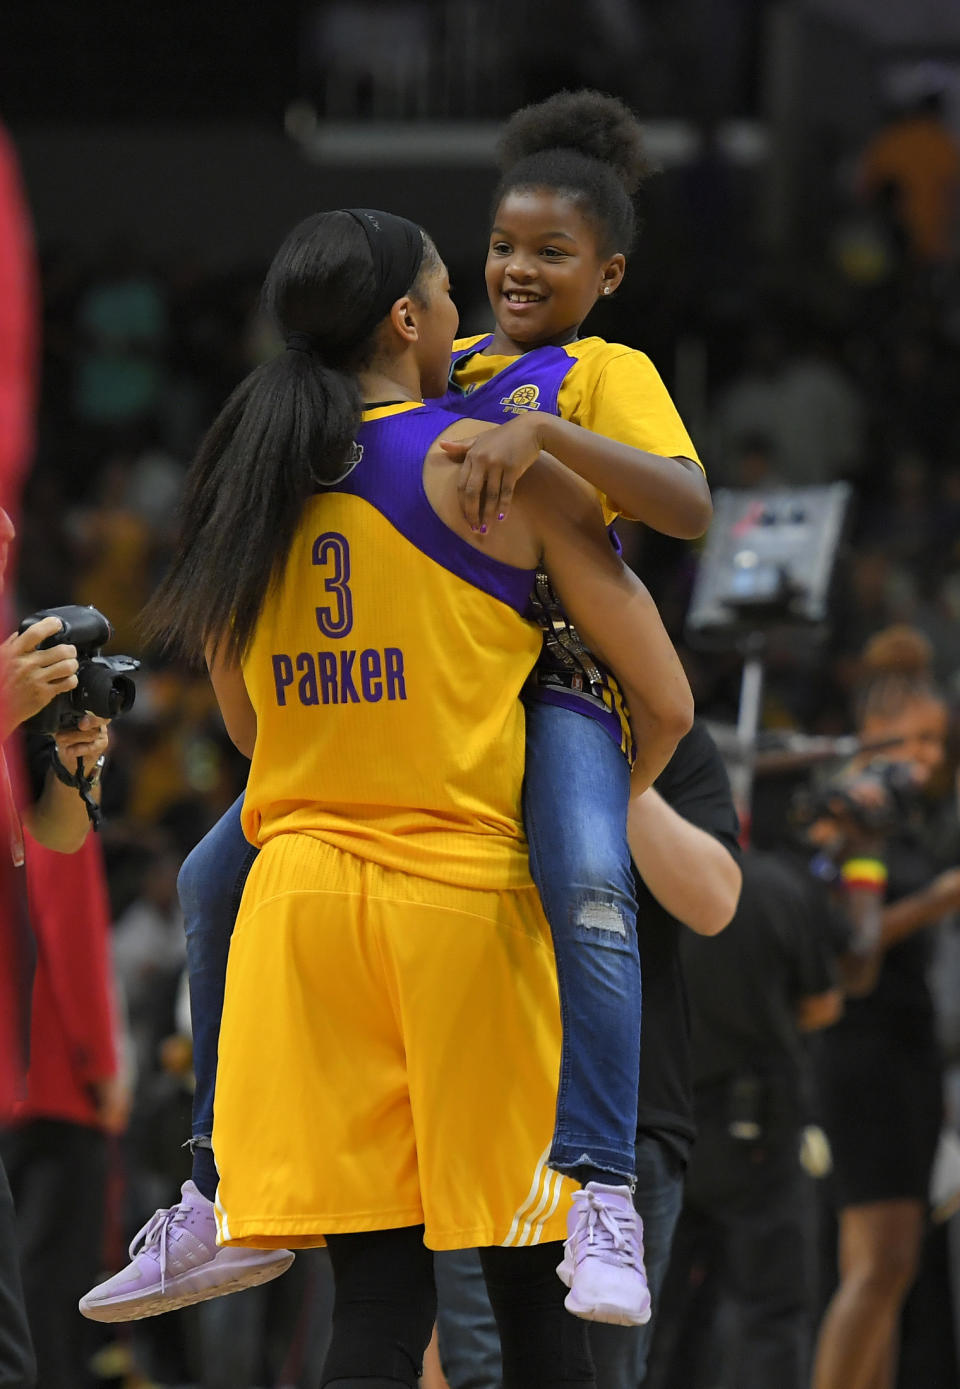 FILE- In this Sept. 29, 2017, file photo, Los Angeles Sparks forward Candace Parker holds her daughter Lailaa Nicole Williams after Game 3 of the WNBA basketball finals against the Minnesota Lynx in Los Angeles. The Sparks won 75-64. Parker and her 11-year-old daughter are braving the start of an unprecedented WNBA season together in Florida. The Los Angeles Sparks All-Star knows it’s a calculated risk to stay in the coronavirus hot spot, where all 12 teams will play games in the WNBA “bubble” of Bradenton. (AP Photo/Mark J. Terrill, File)